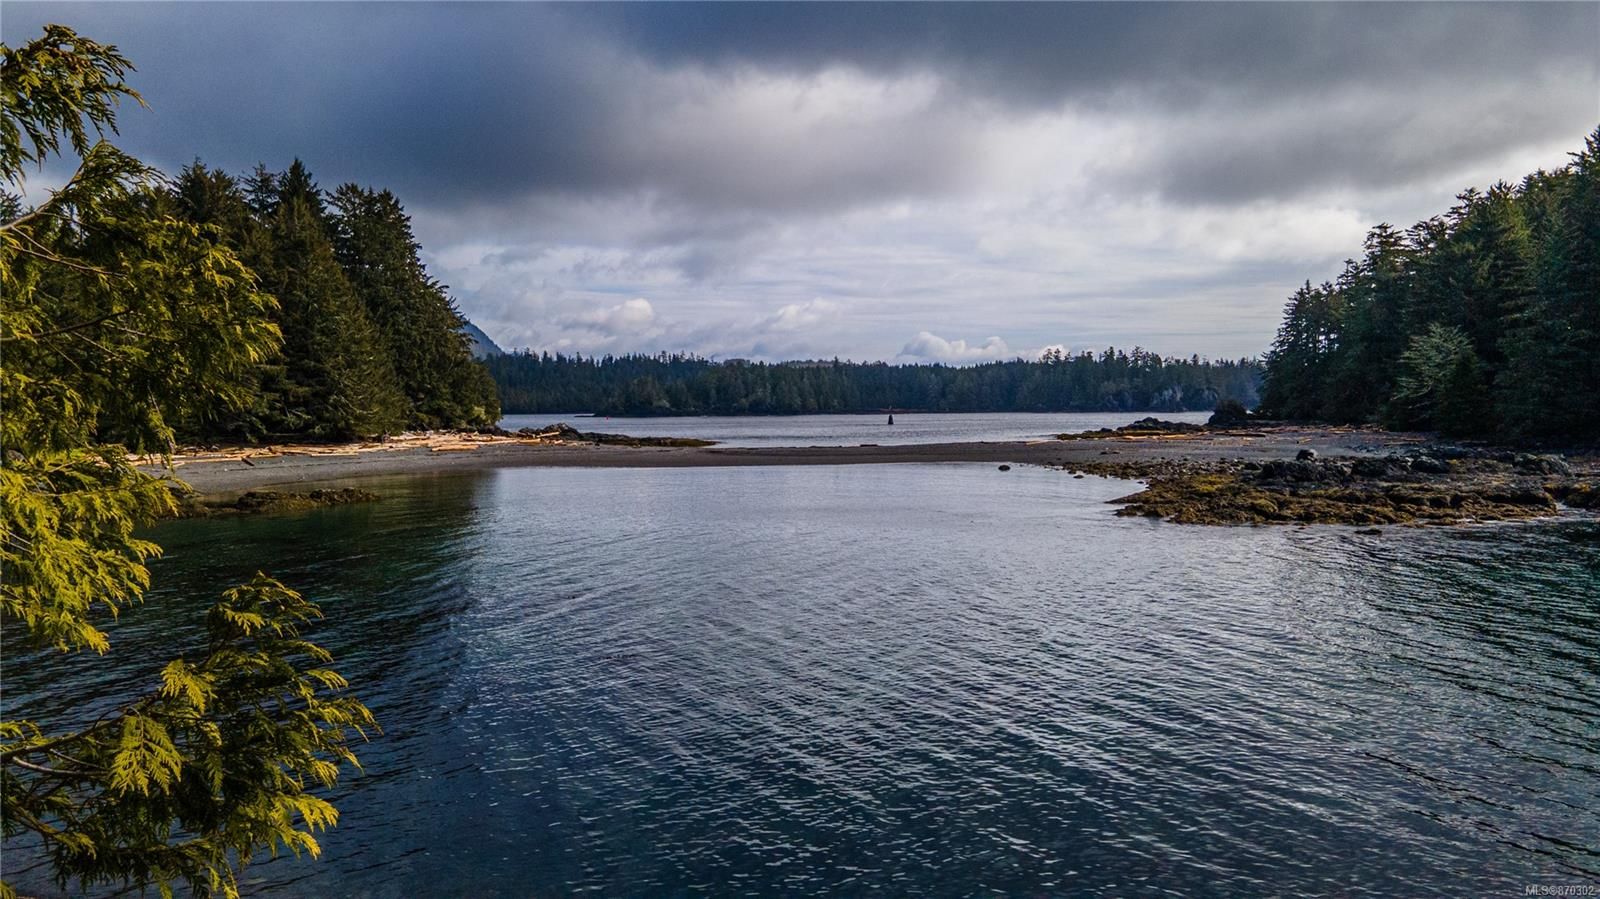 Main Photo: 863 Elina Rd in Ucluelet: PA Ucluelet Land for sale (Port Alberni)  : MLS®# 870302